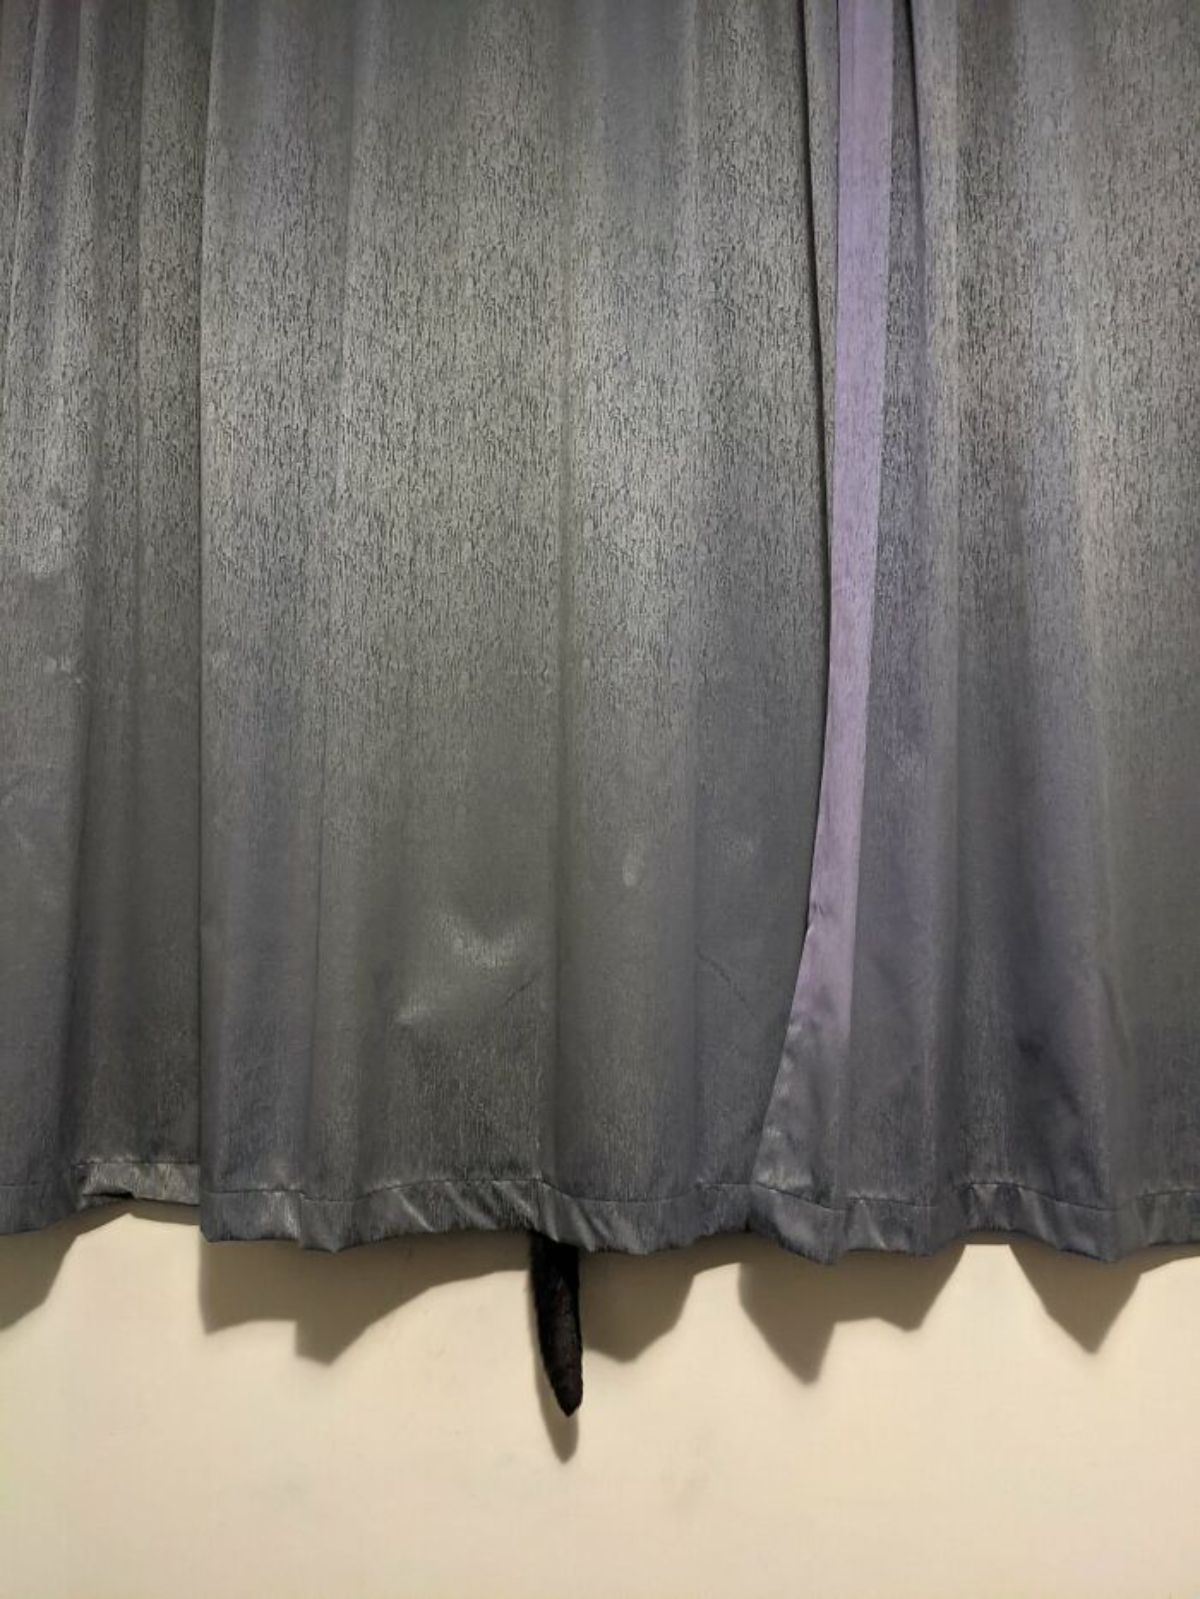 black tail sticking out from under grey curtains